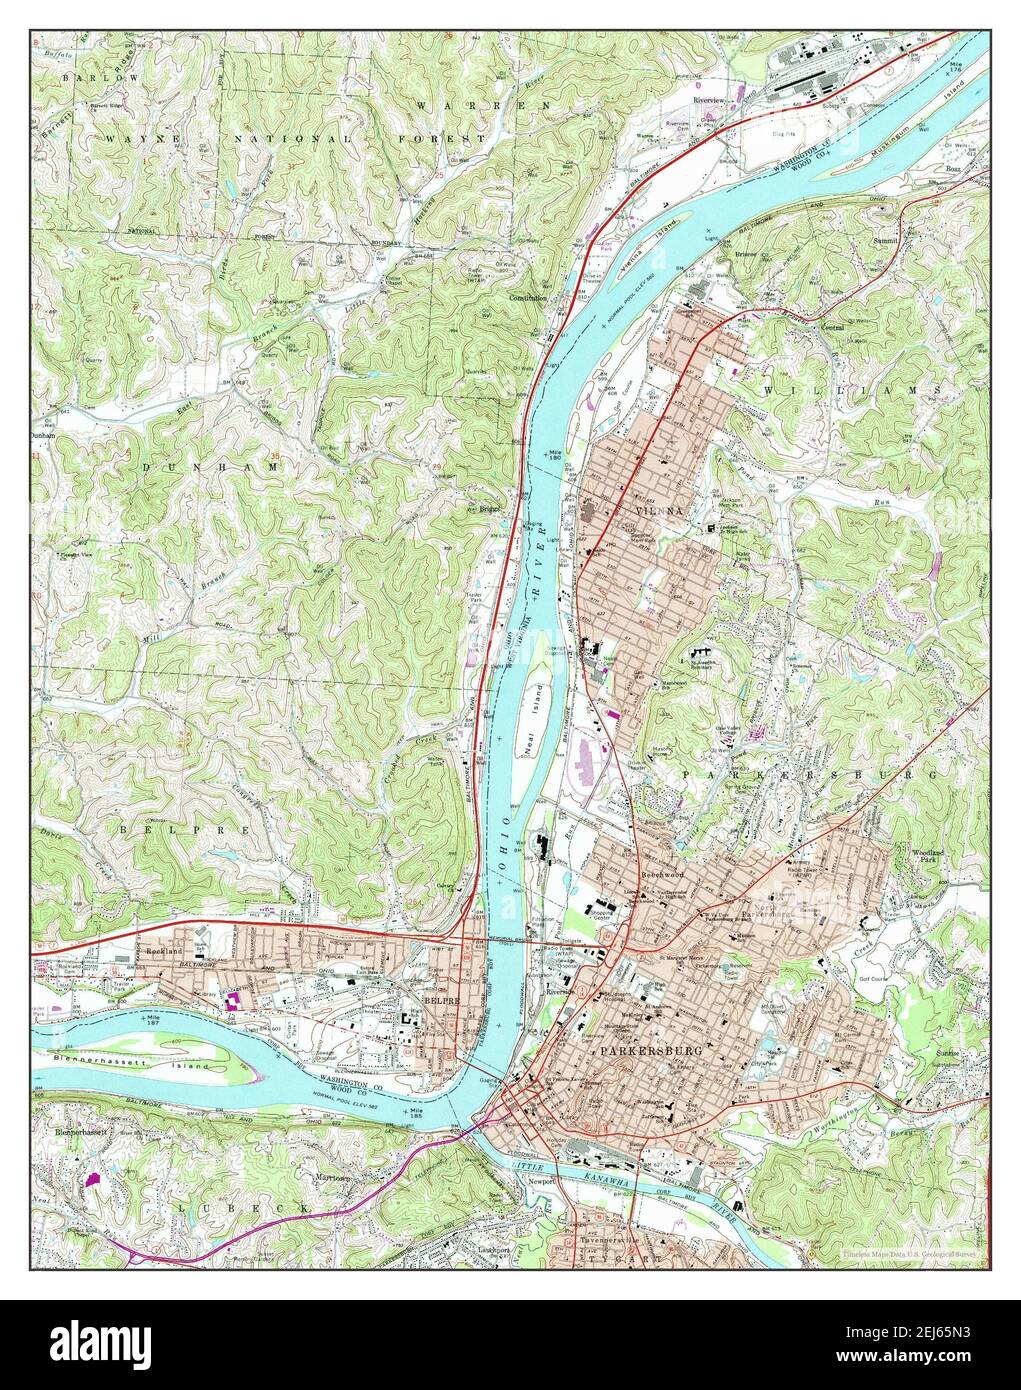 Parkersburg, West Virginia, map 1969, 1:24000, United States of America by Timeless Maps, data U.S. Geological Survey Stock Photo